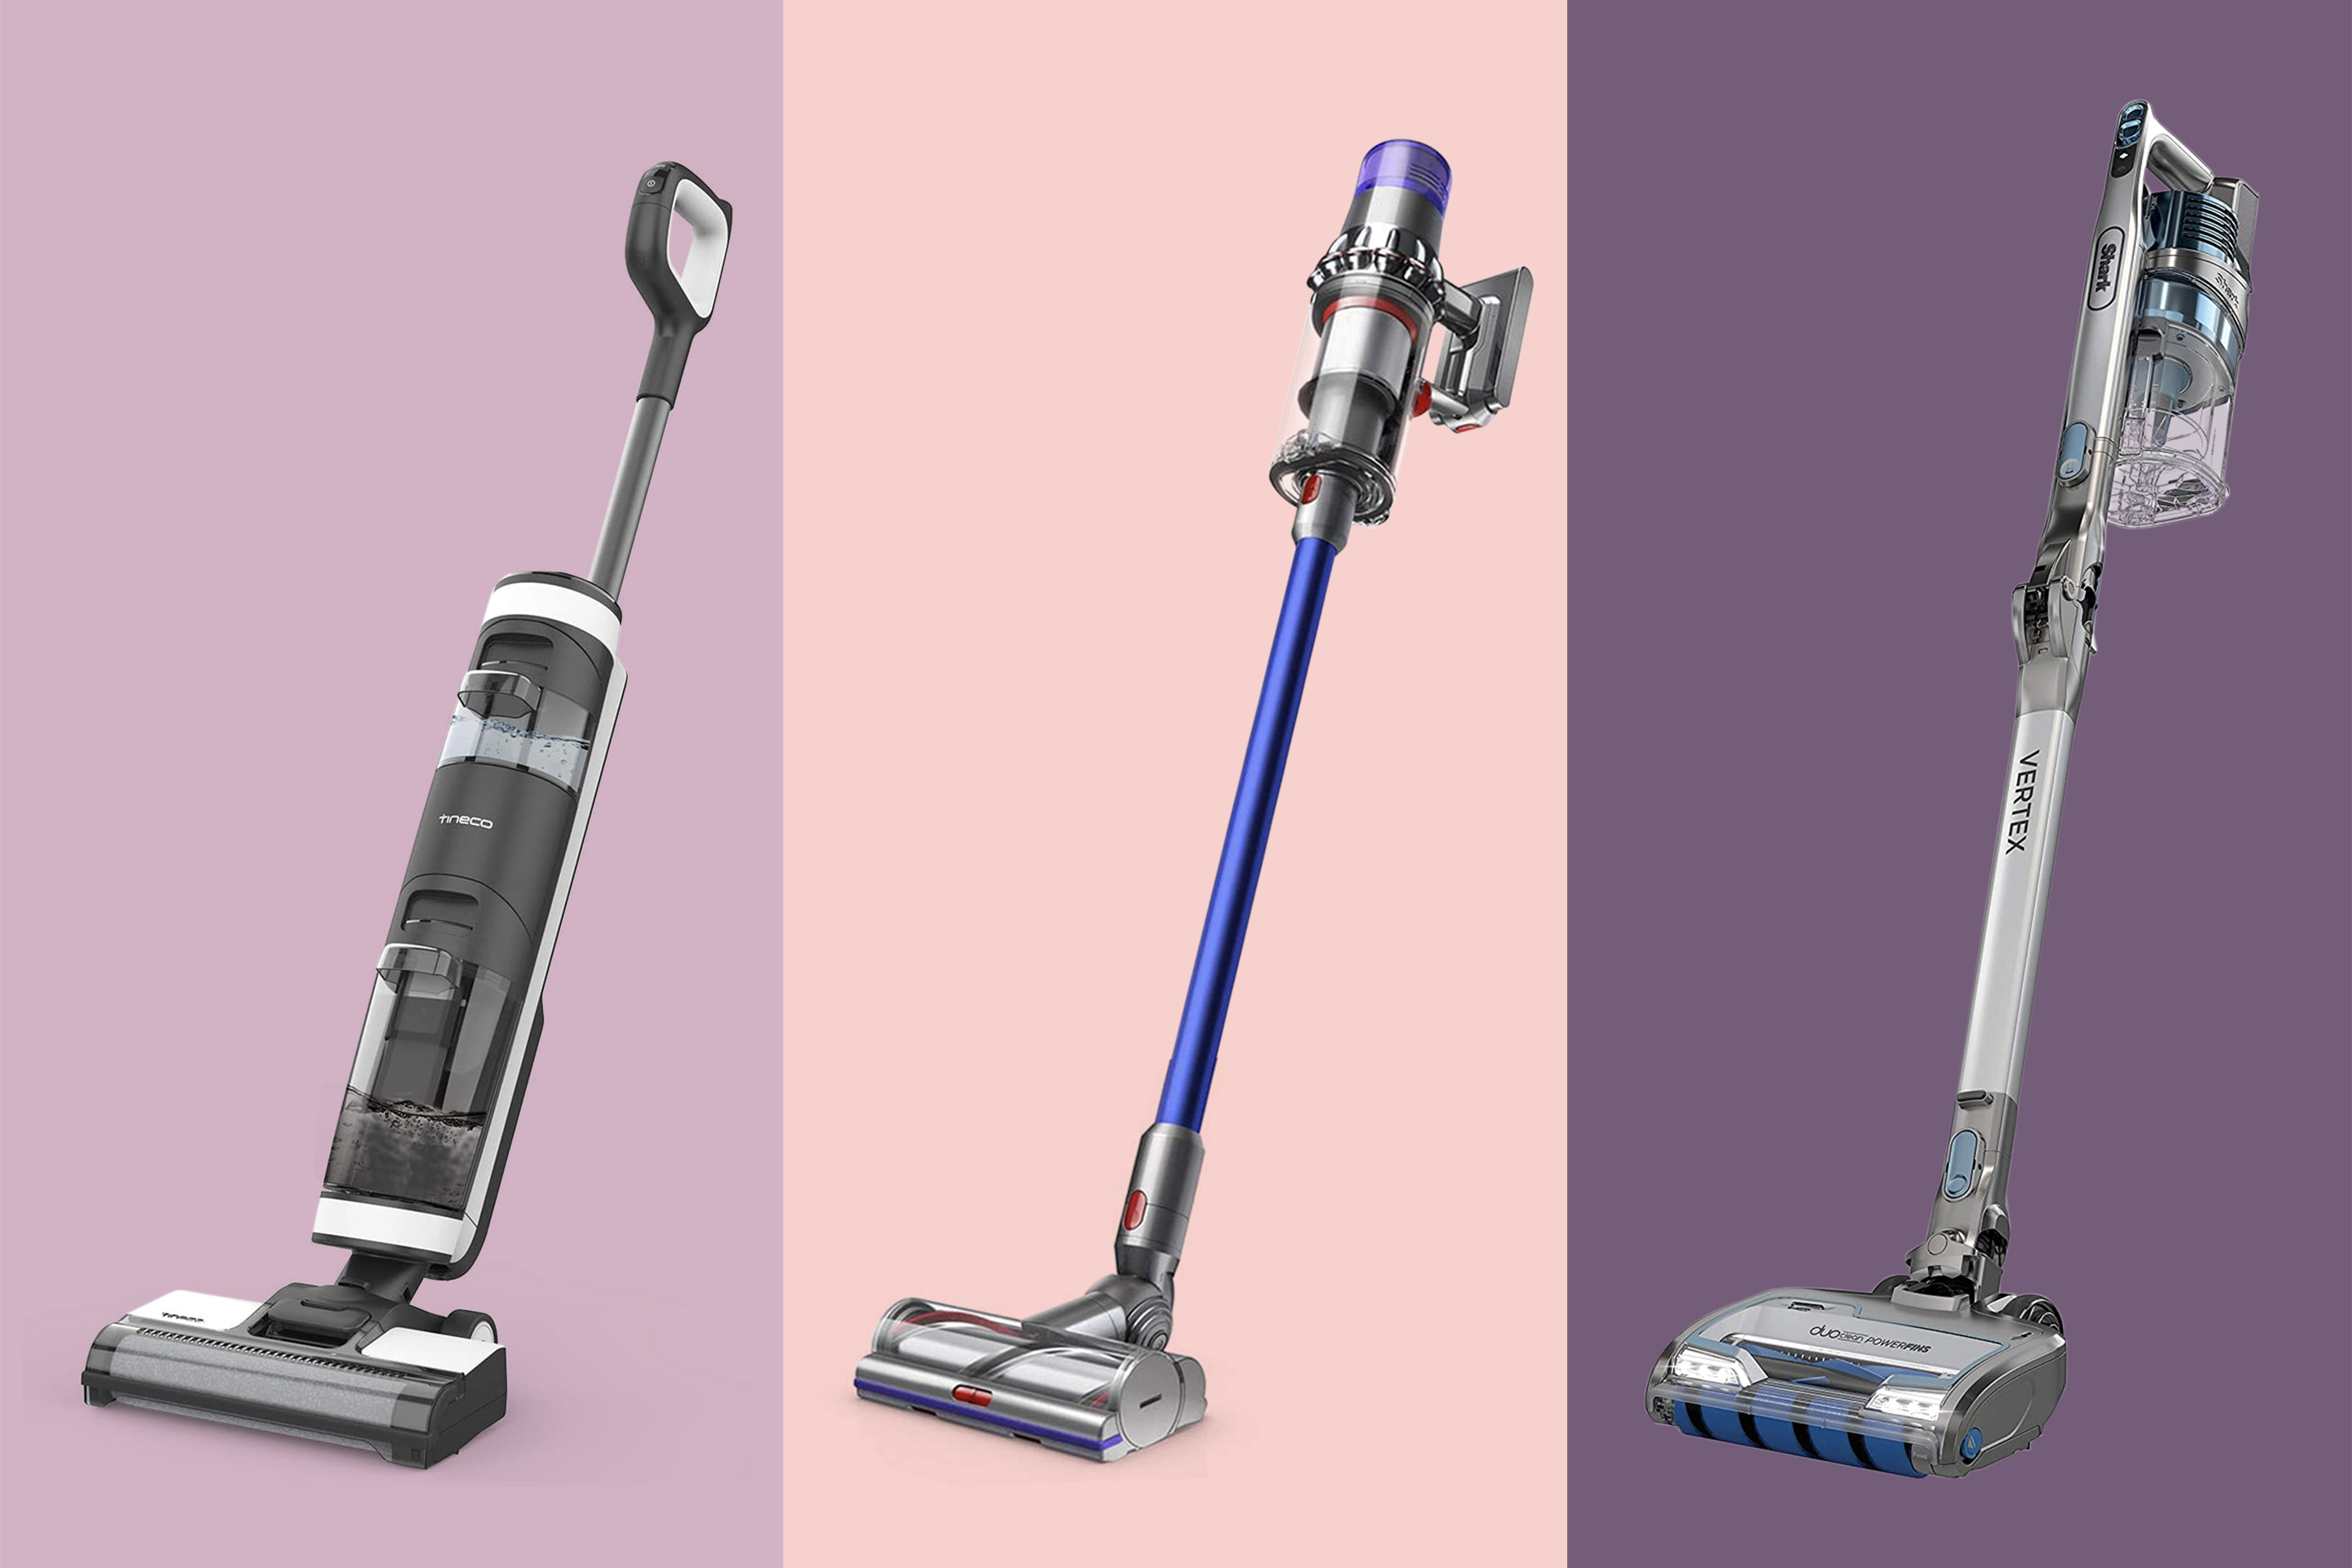 The Best Cordless Vacuum Cleaners for Your Money